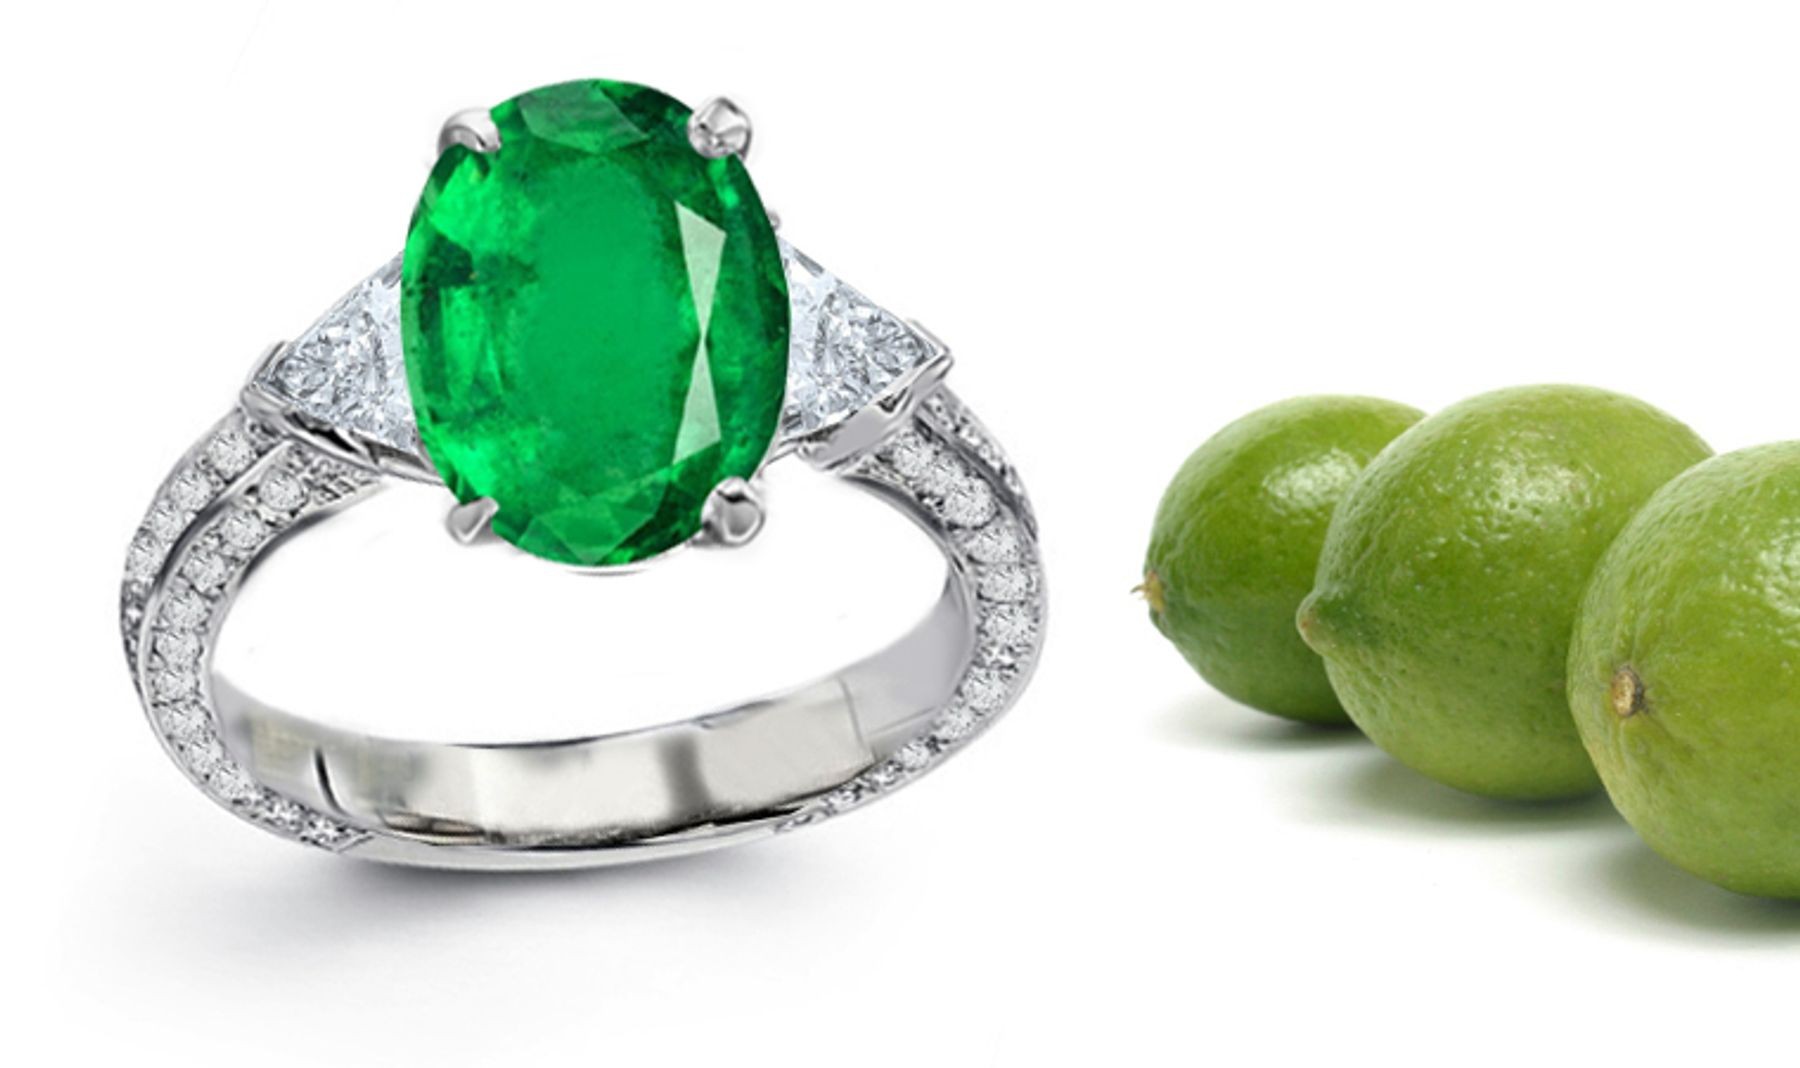 Three Stone Diamond Rings Features Center Oval Emerald with Trillion Diamond side stones